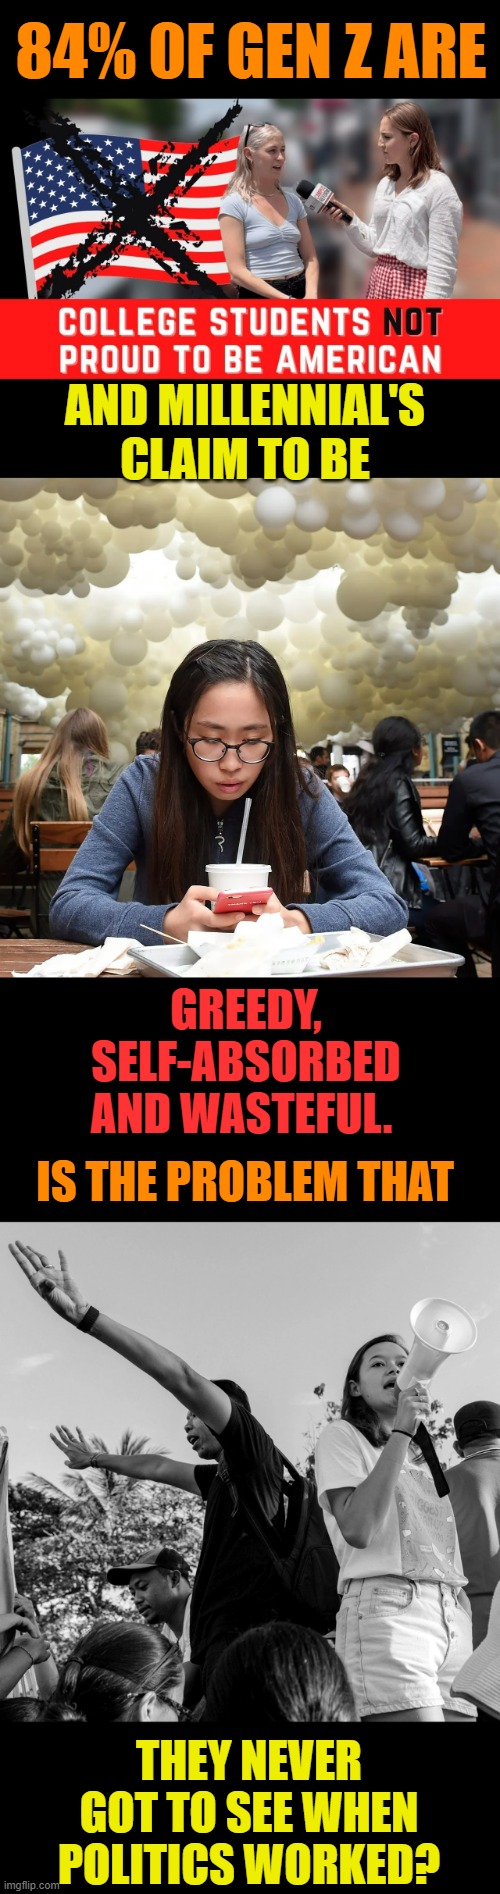 What happened here? | 84% 0F GEN Z ARE; AND MILLENNIAL'S CLAIM TO BE; GREEDY, SELF-ABSORBED AND WASTEFUL. IS THE PROBLEM THAT; THEY NEVER GOT TO SEE WHEN POLITICS WORKED? | image tagged in memes,politics,generation z,millennials,not,proud | made w/ Imgflip meme maker